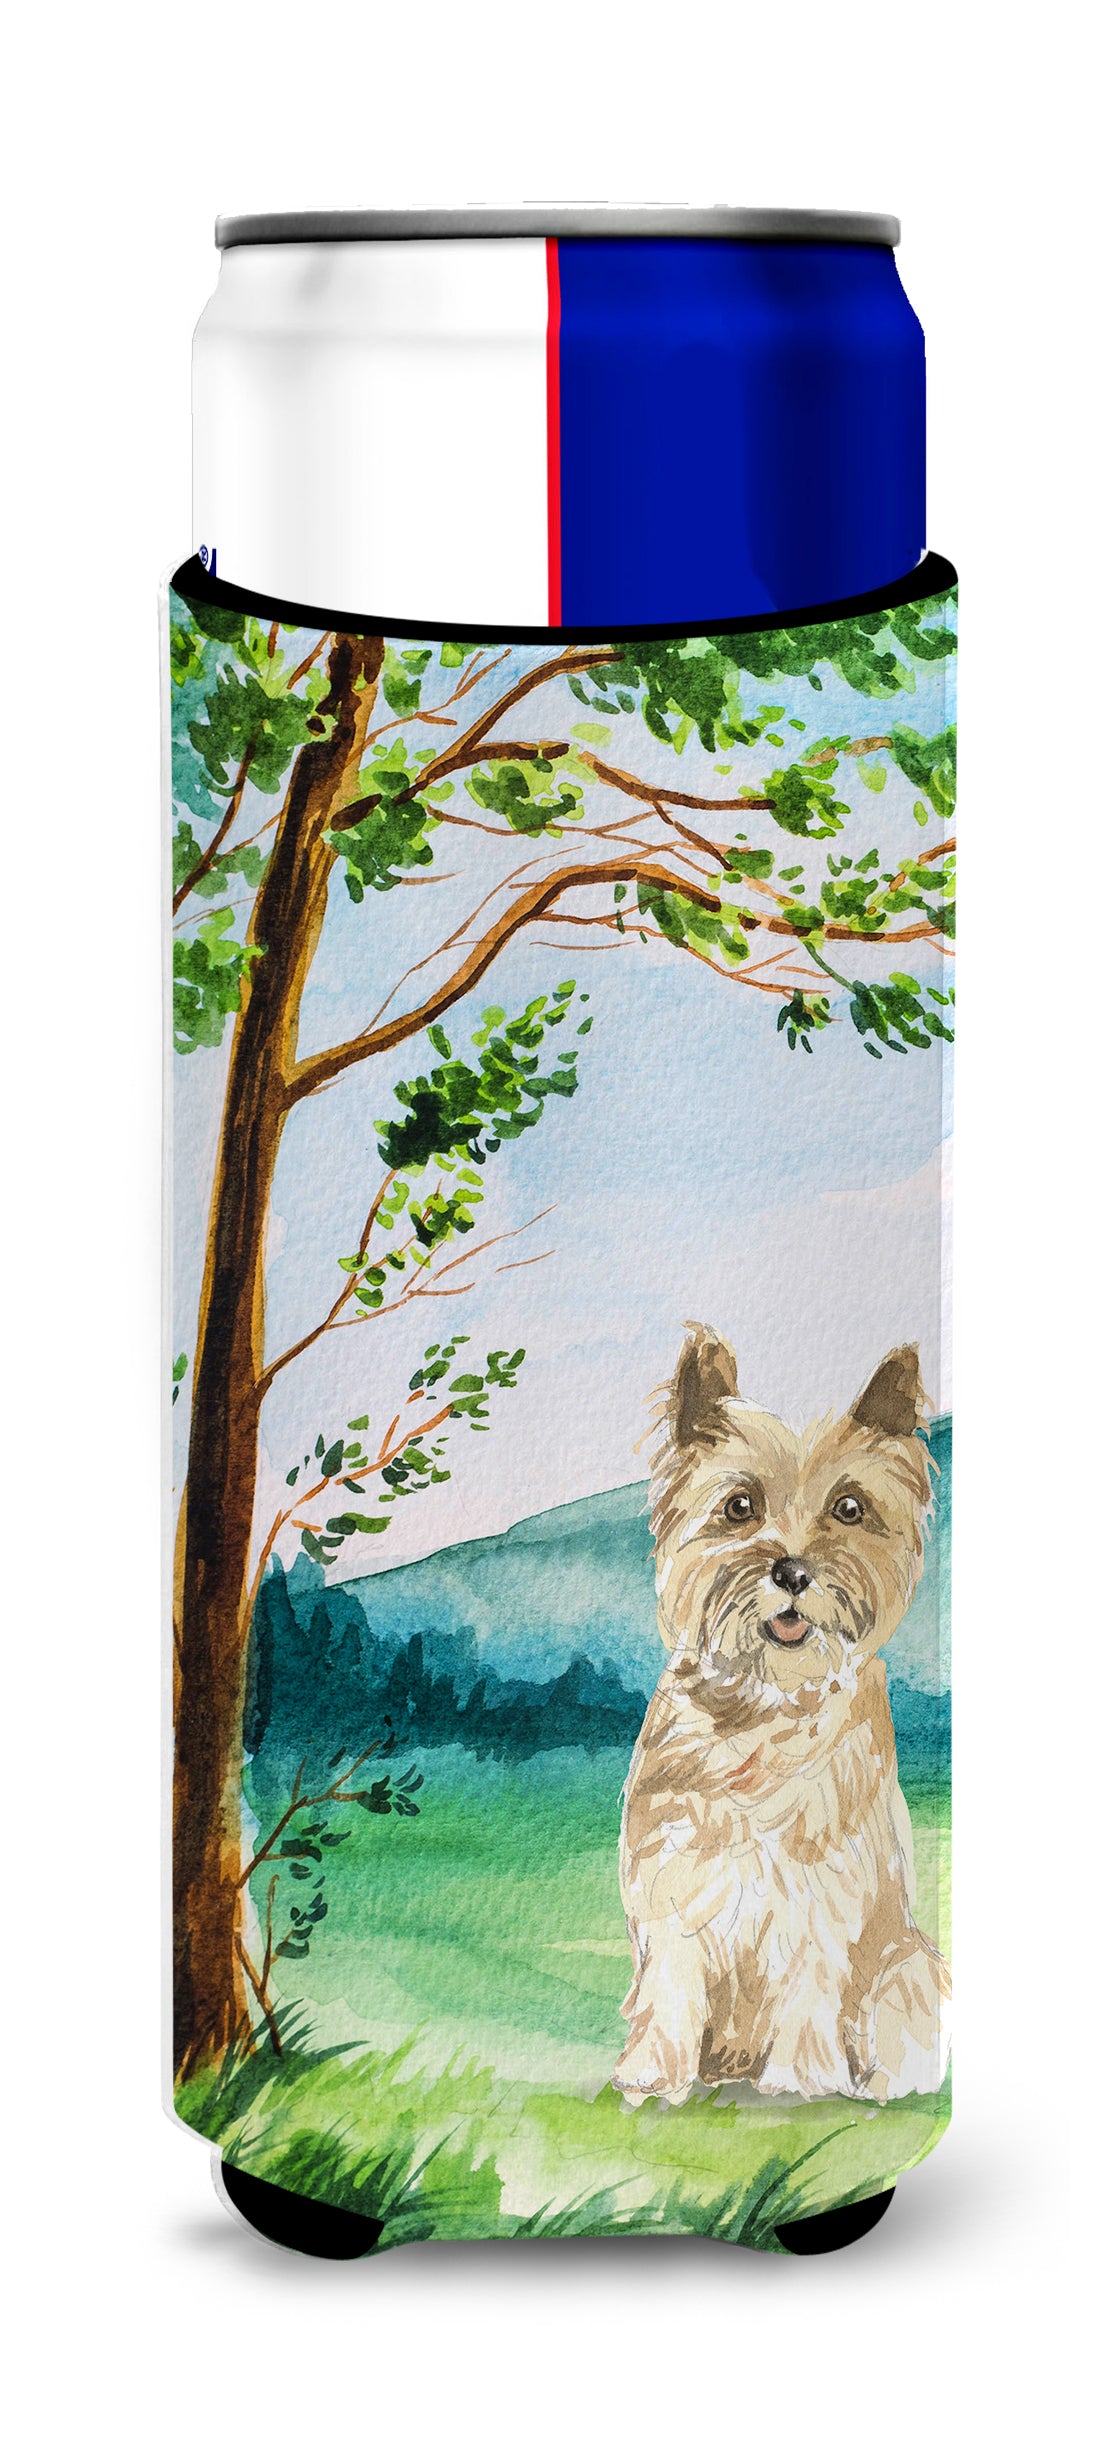 Under the Tree Cairn Terrier  Ultra Hugger for slim cans CK2577MUK